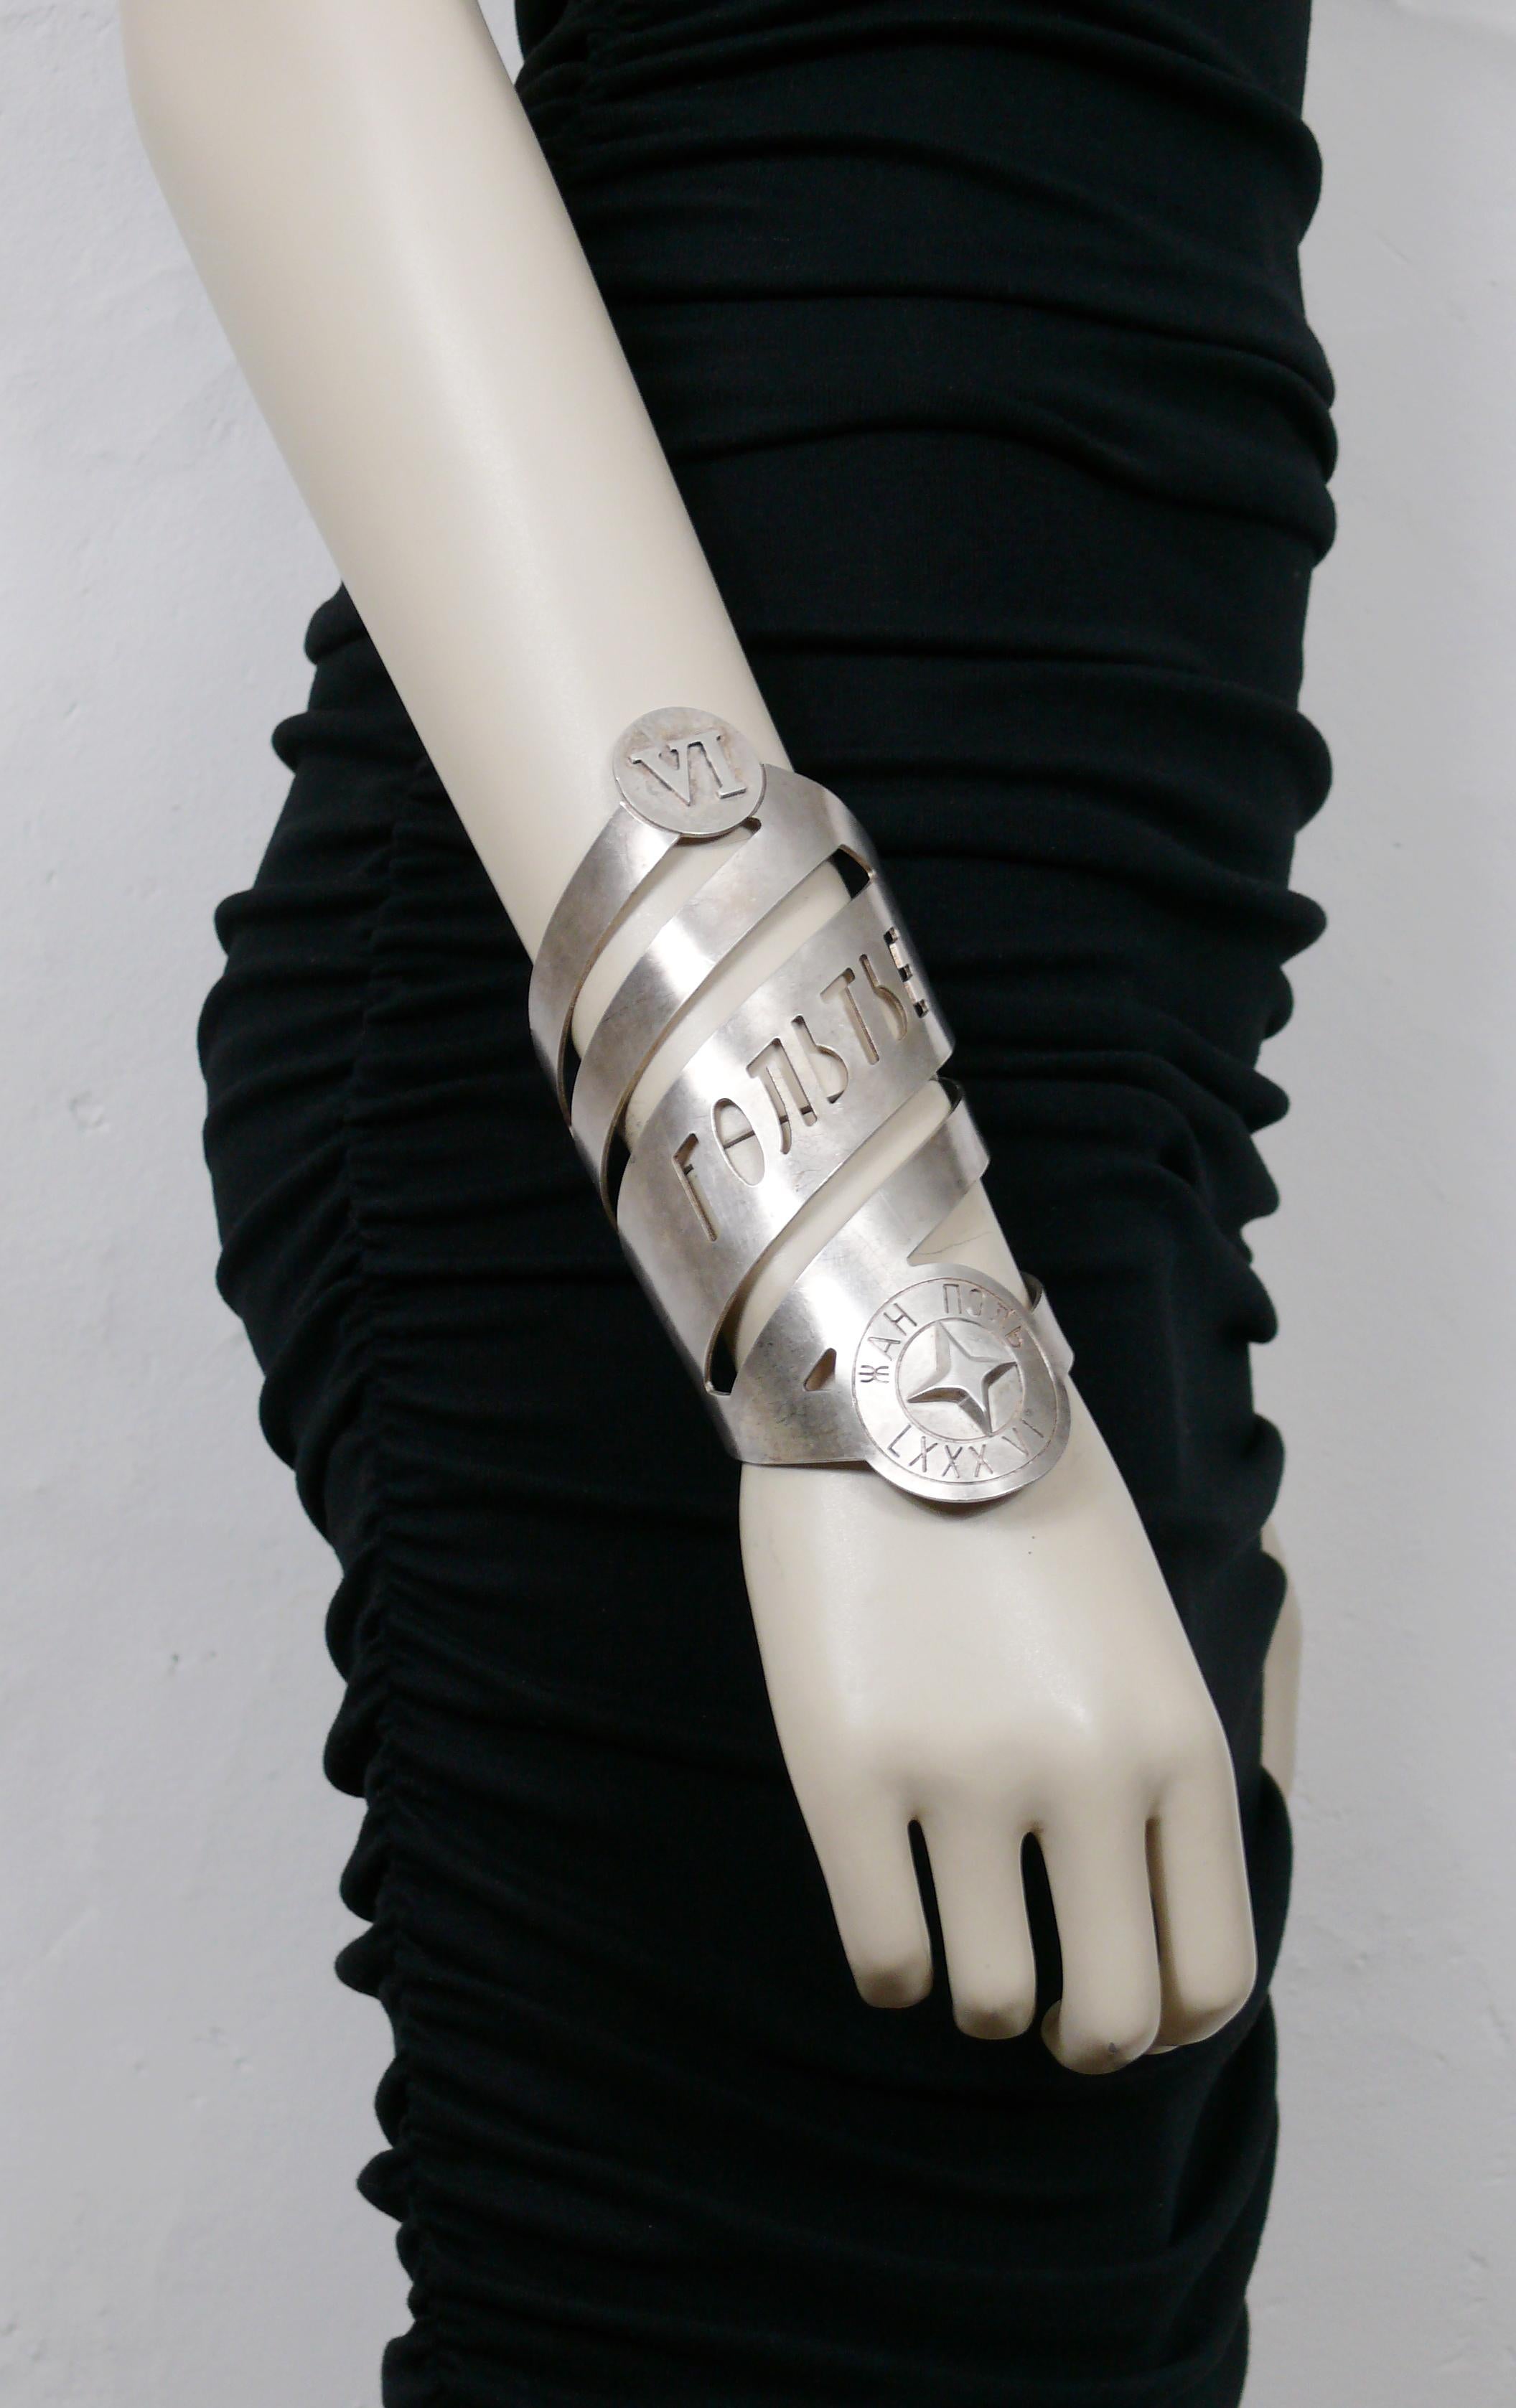 JEAN PAUL GAULTIER (attributed to) vintage rare cuff bracelet from the Autumn/Winter 1986 Russian Constructivism collection.

This bracelet features the signature JEAN PAUL GAULTIER in in Cyrillic characters and the number 86 in roman numerals